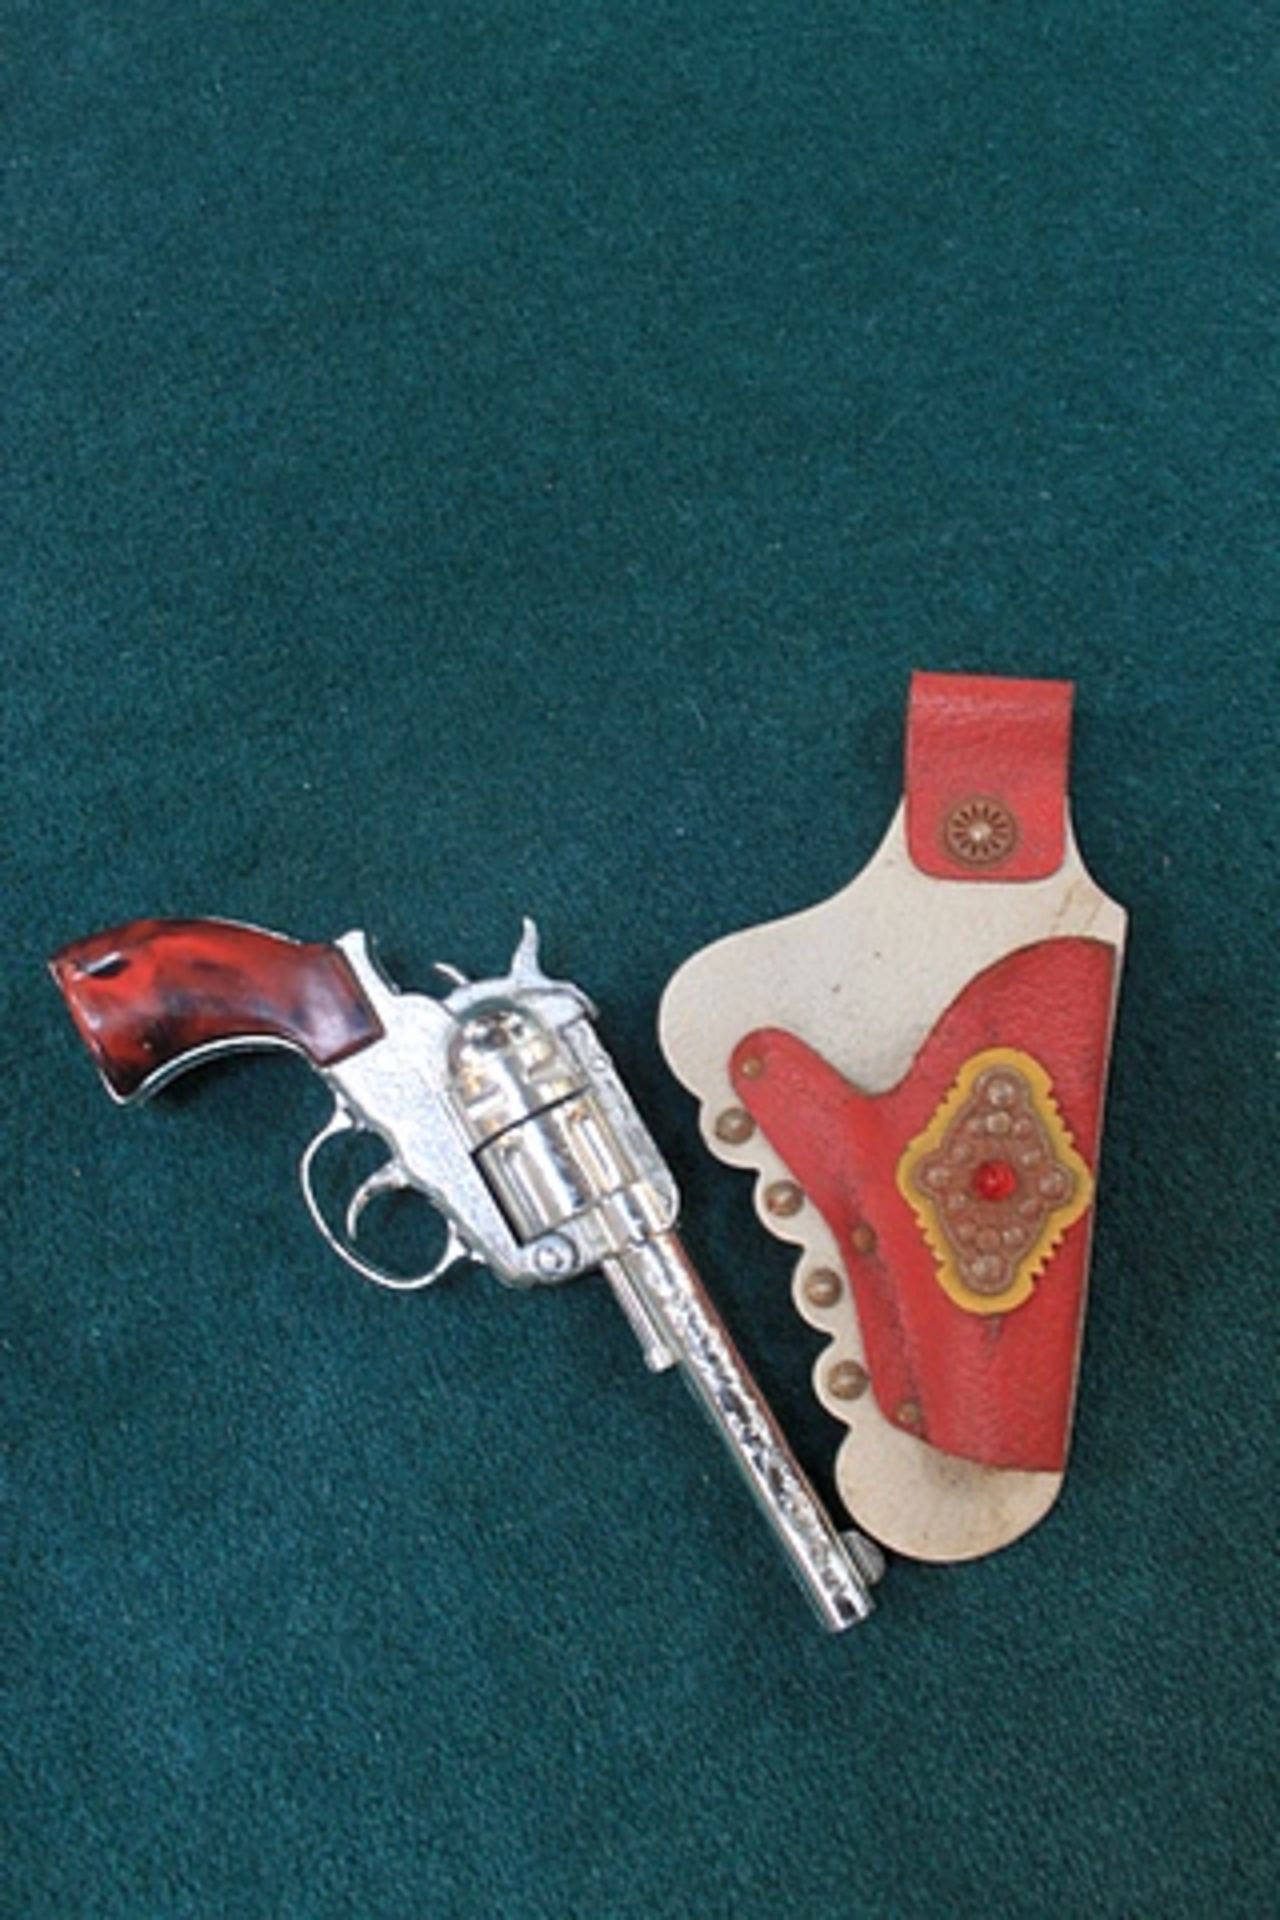 CRESCENT TOYS ENGLAND RICOCHET FRONTIER ACE PAPER CAP GUN And Holster - Image 2 of 2